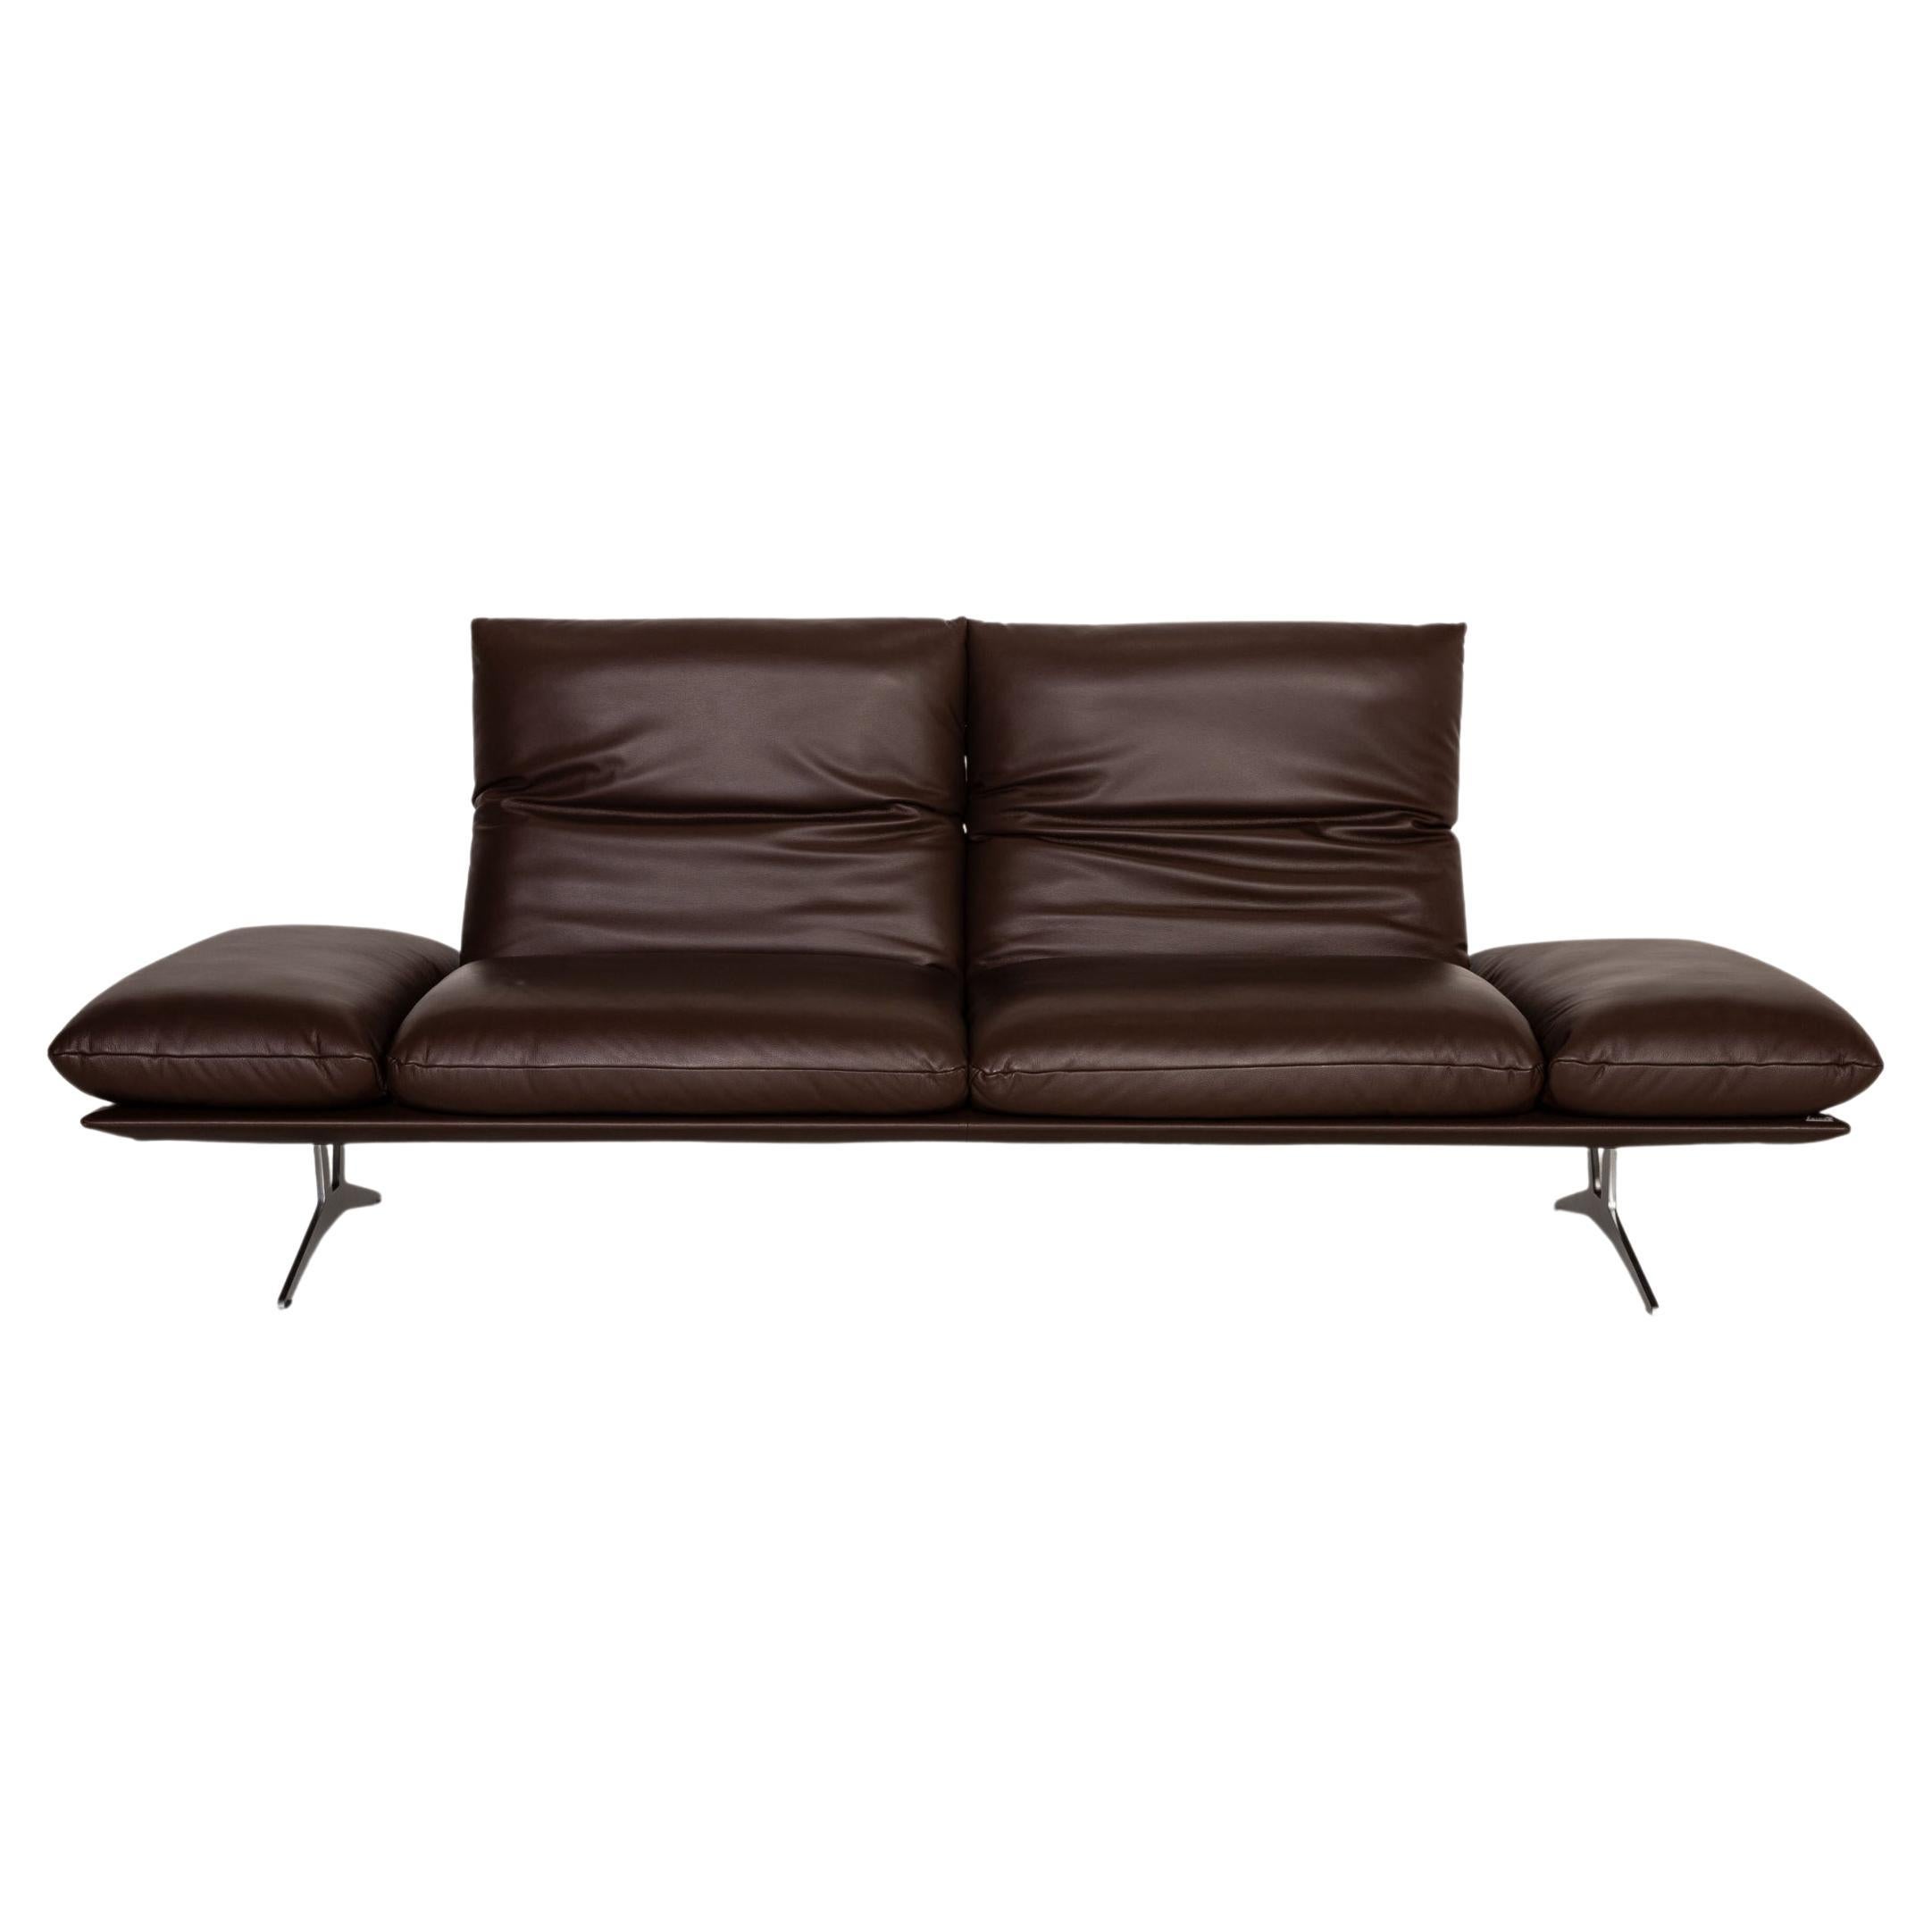 Koinor Francis Leather Sofa Brown Three Seater Couch Function For Sale